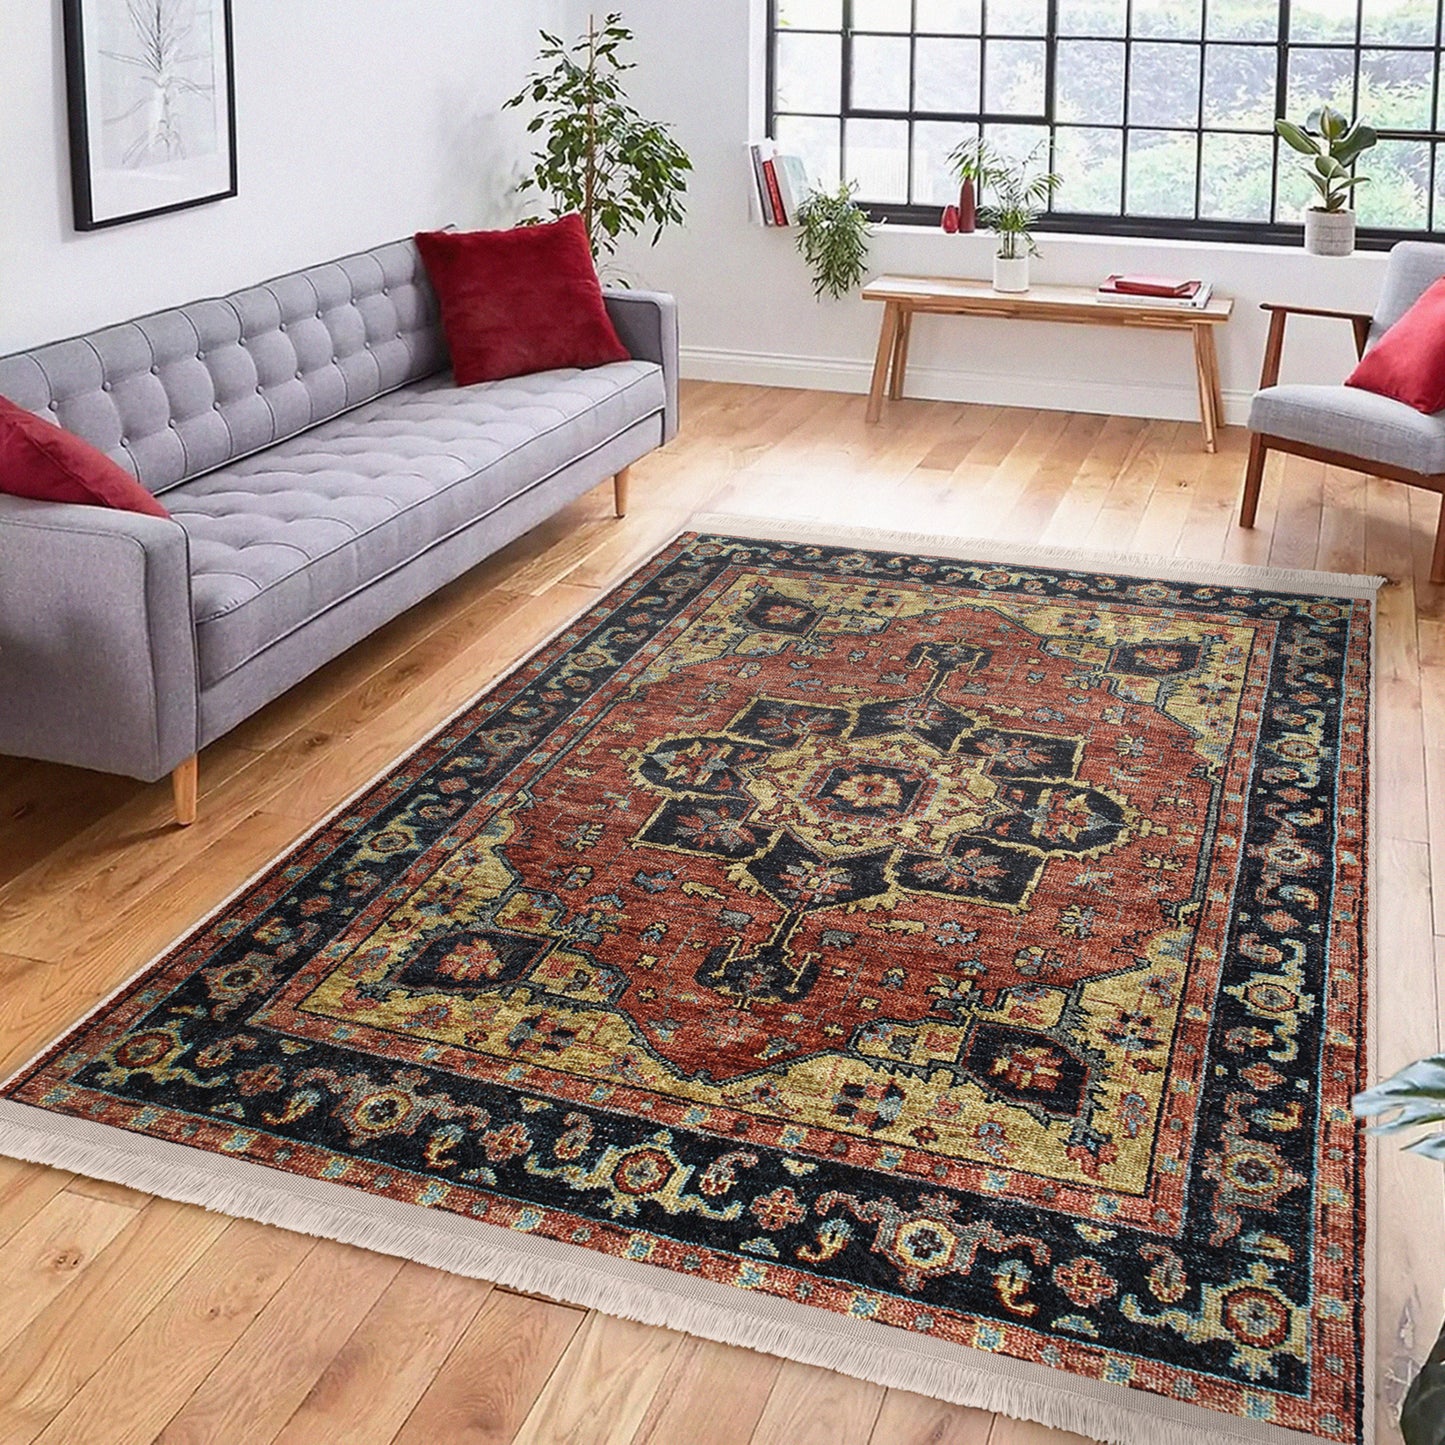 Soft & Durable Homeezone Rug - Bedroom Placement